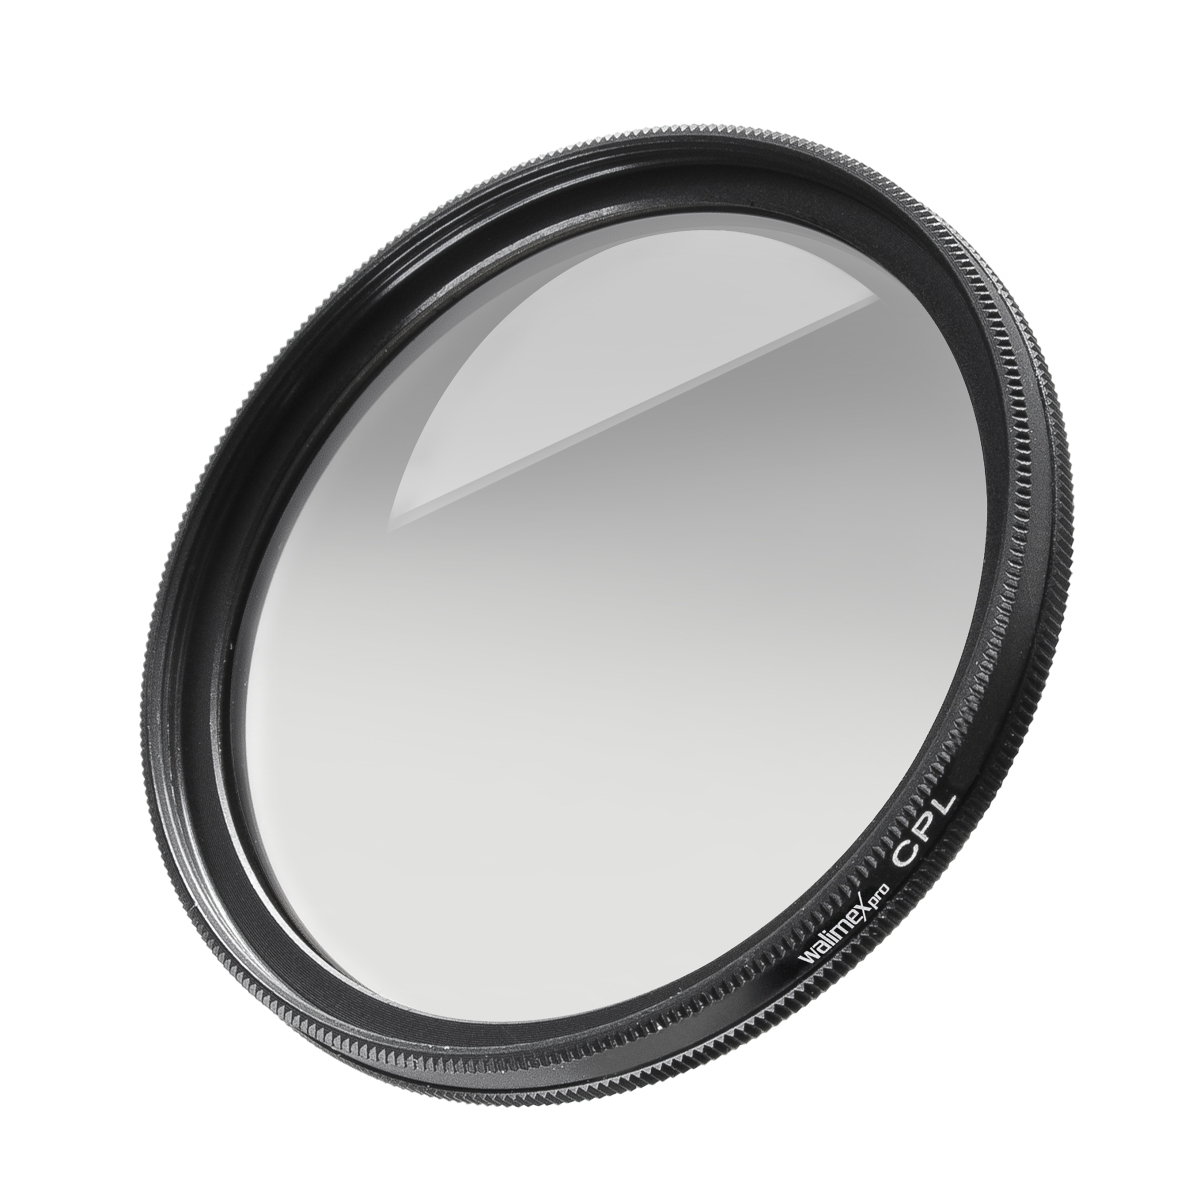 Walimex pro MC CPL filter coated 67 mm